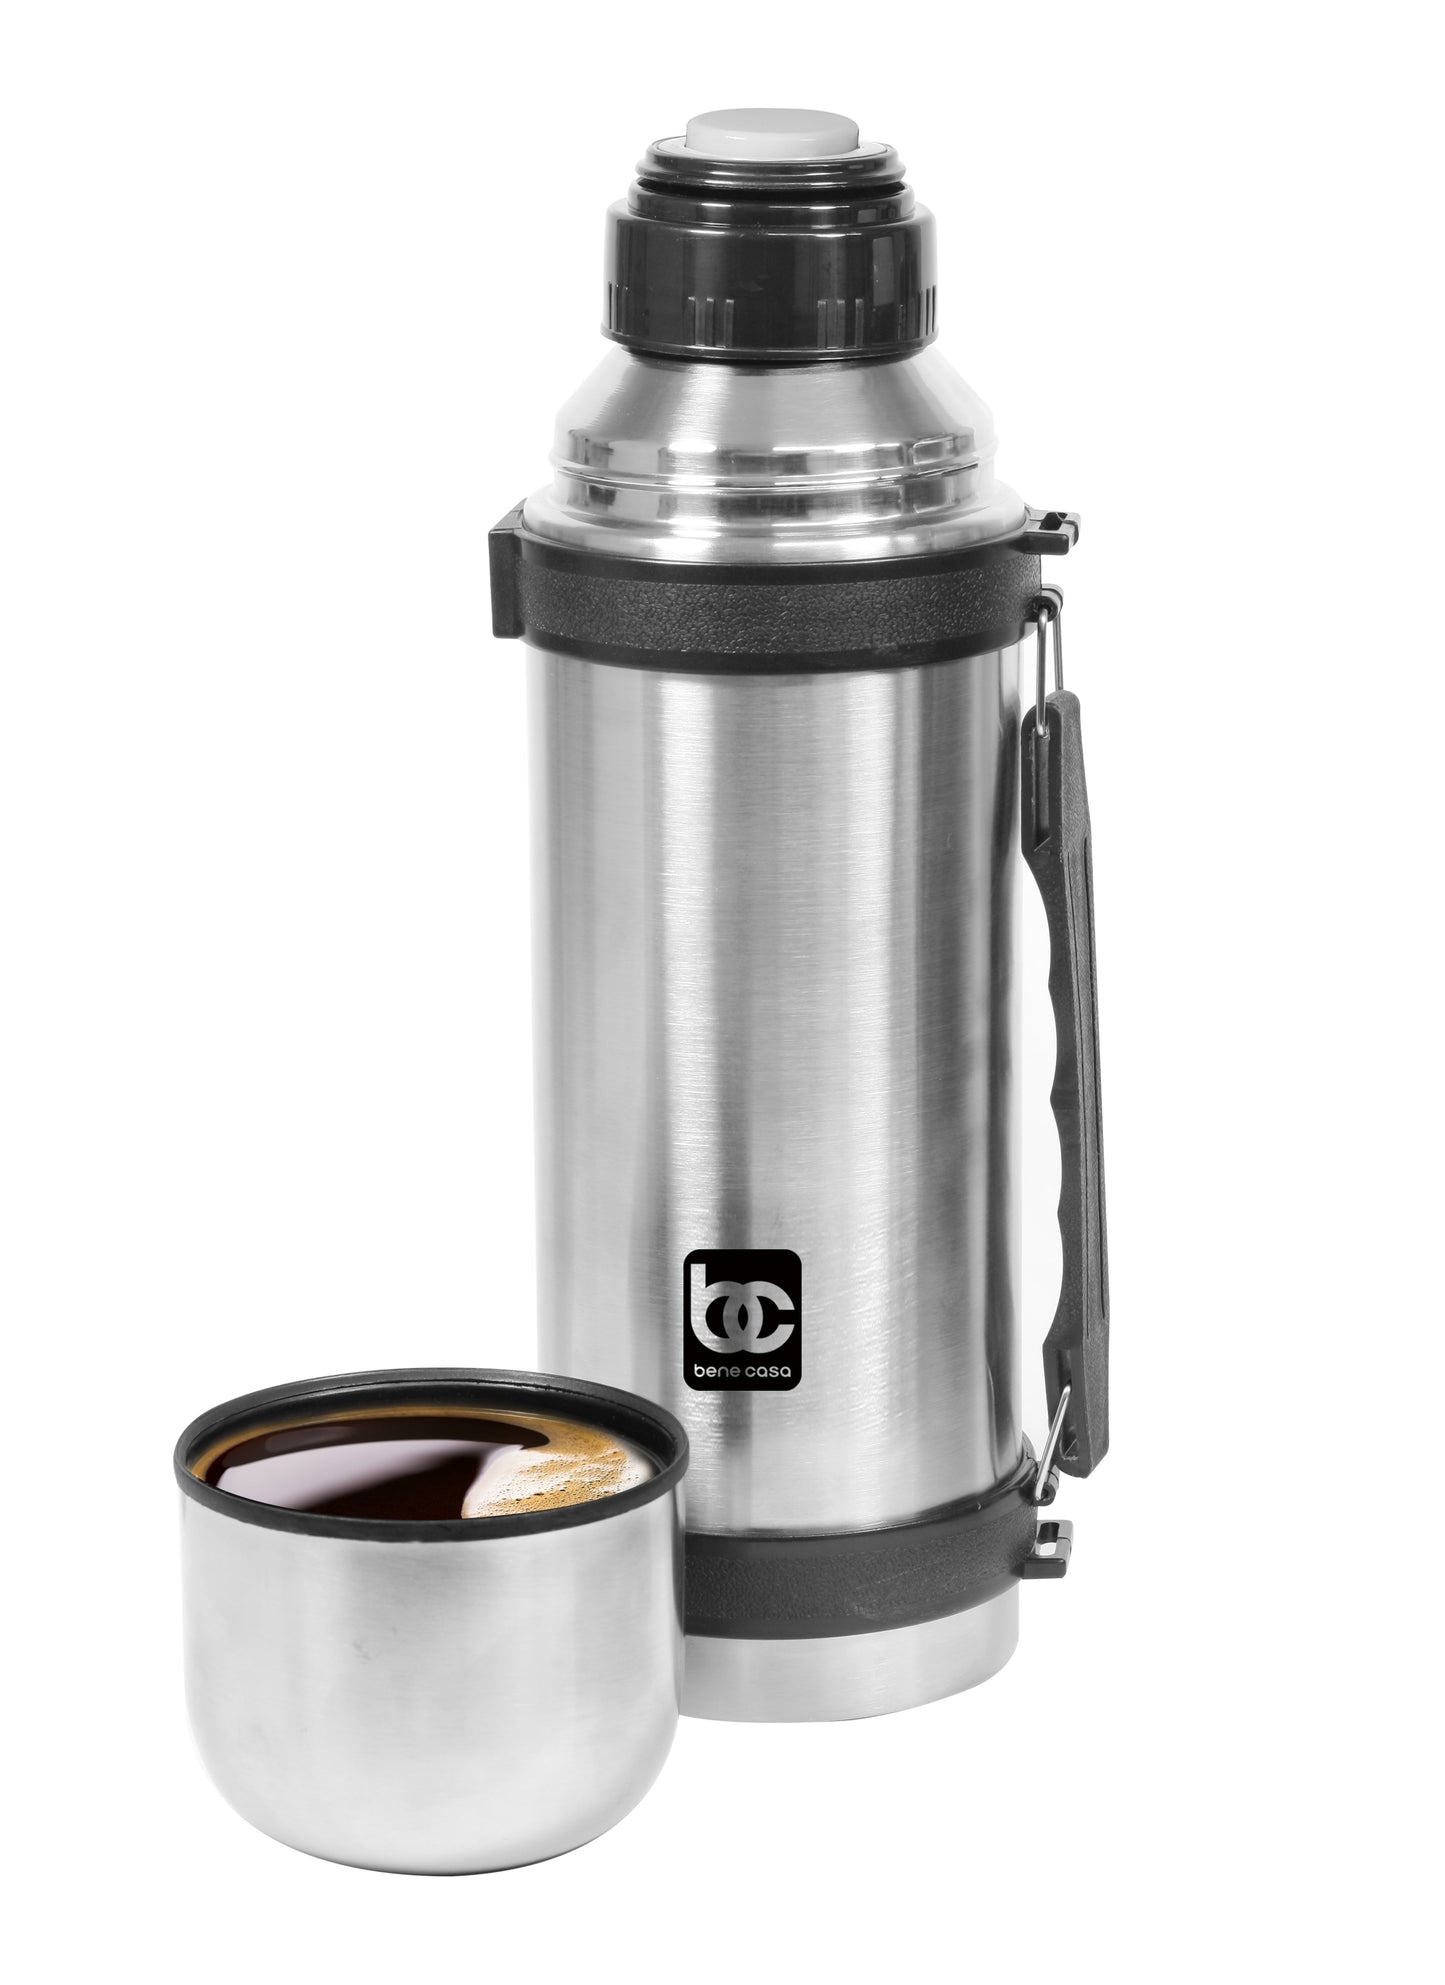 Thermos 345023 24 oz Stainless Steel Cold Cup